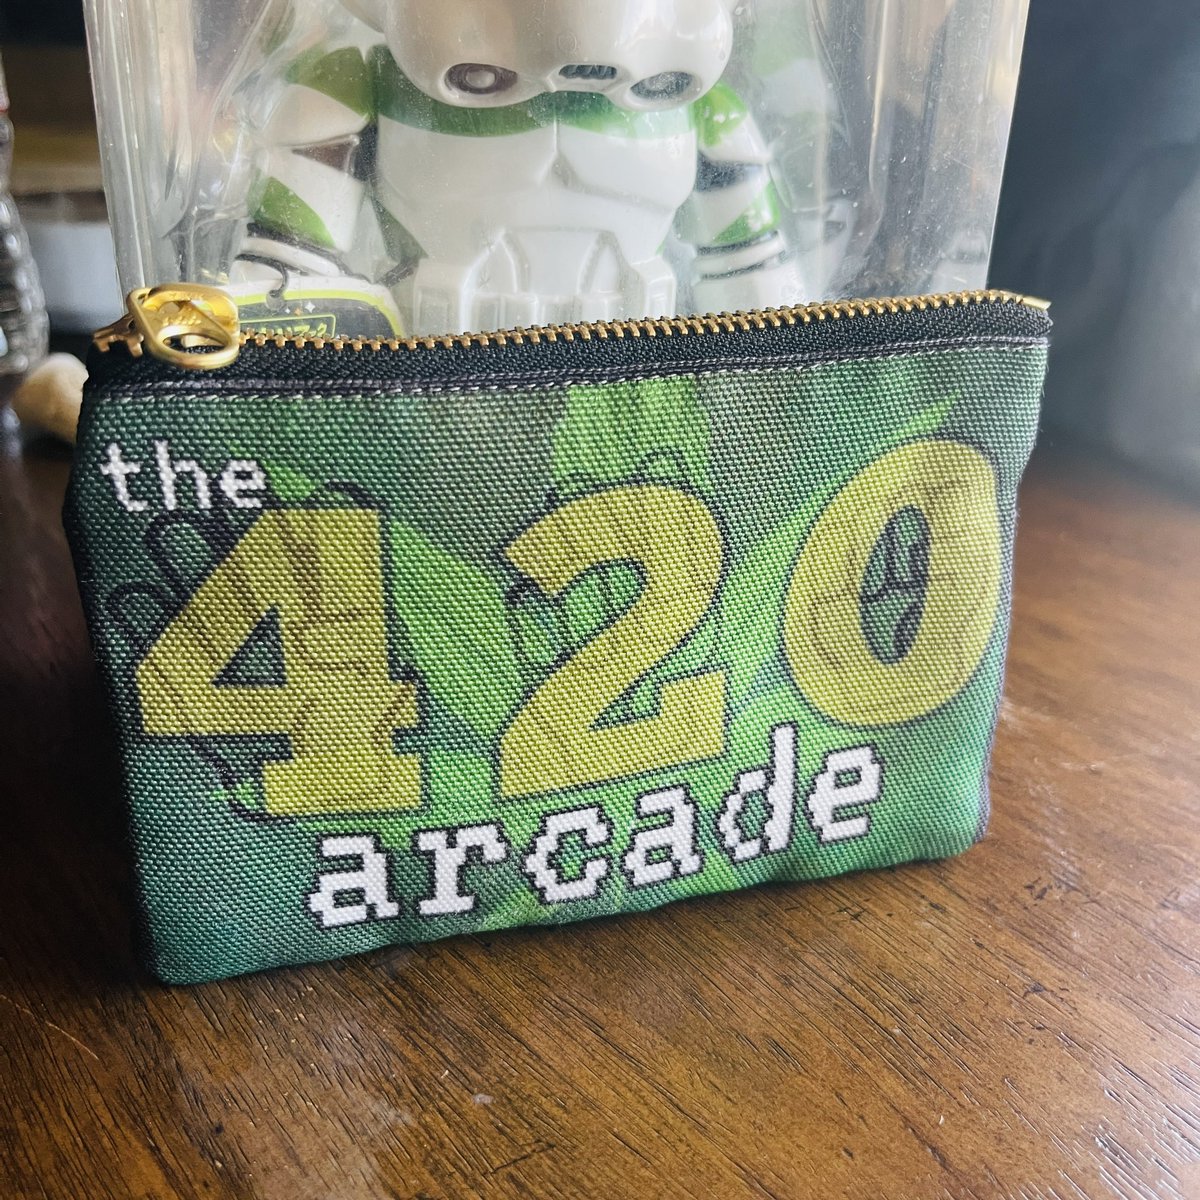 IT HATH ARRIVED!! and its AMAZING!!! thank you @the420arcade & @terratokes for this awesome prize from their weekly trivia night!! annnddd you can even get your own on #the420arcade's shop 💯💯💯 thank you so much guys, yall make the weka so much fun!! #StonerFam #terratokes